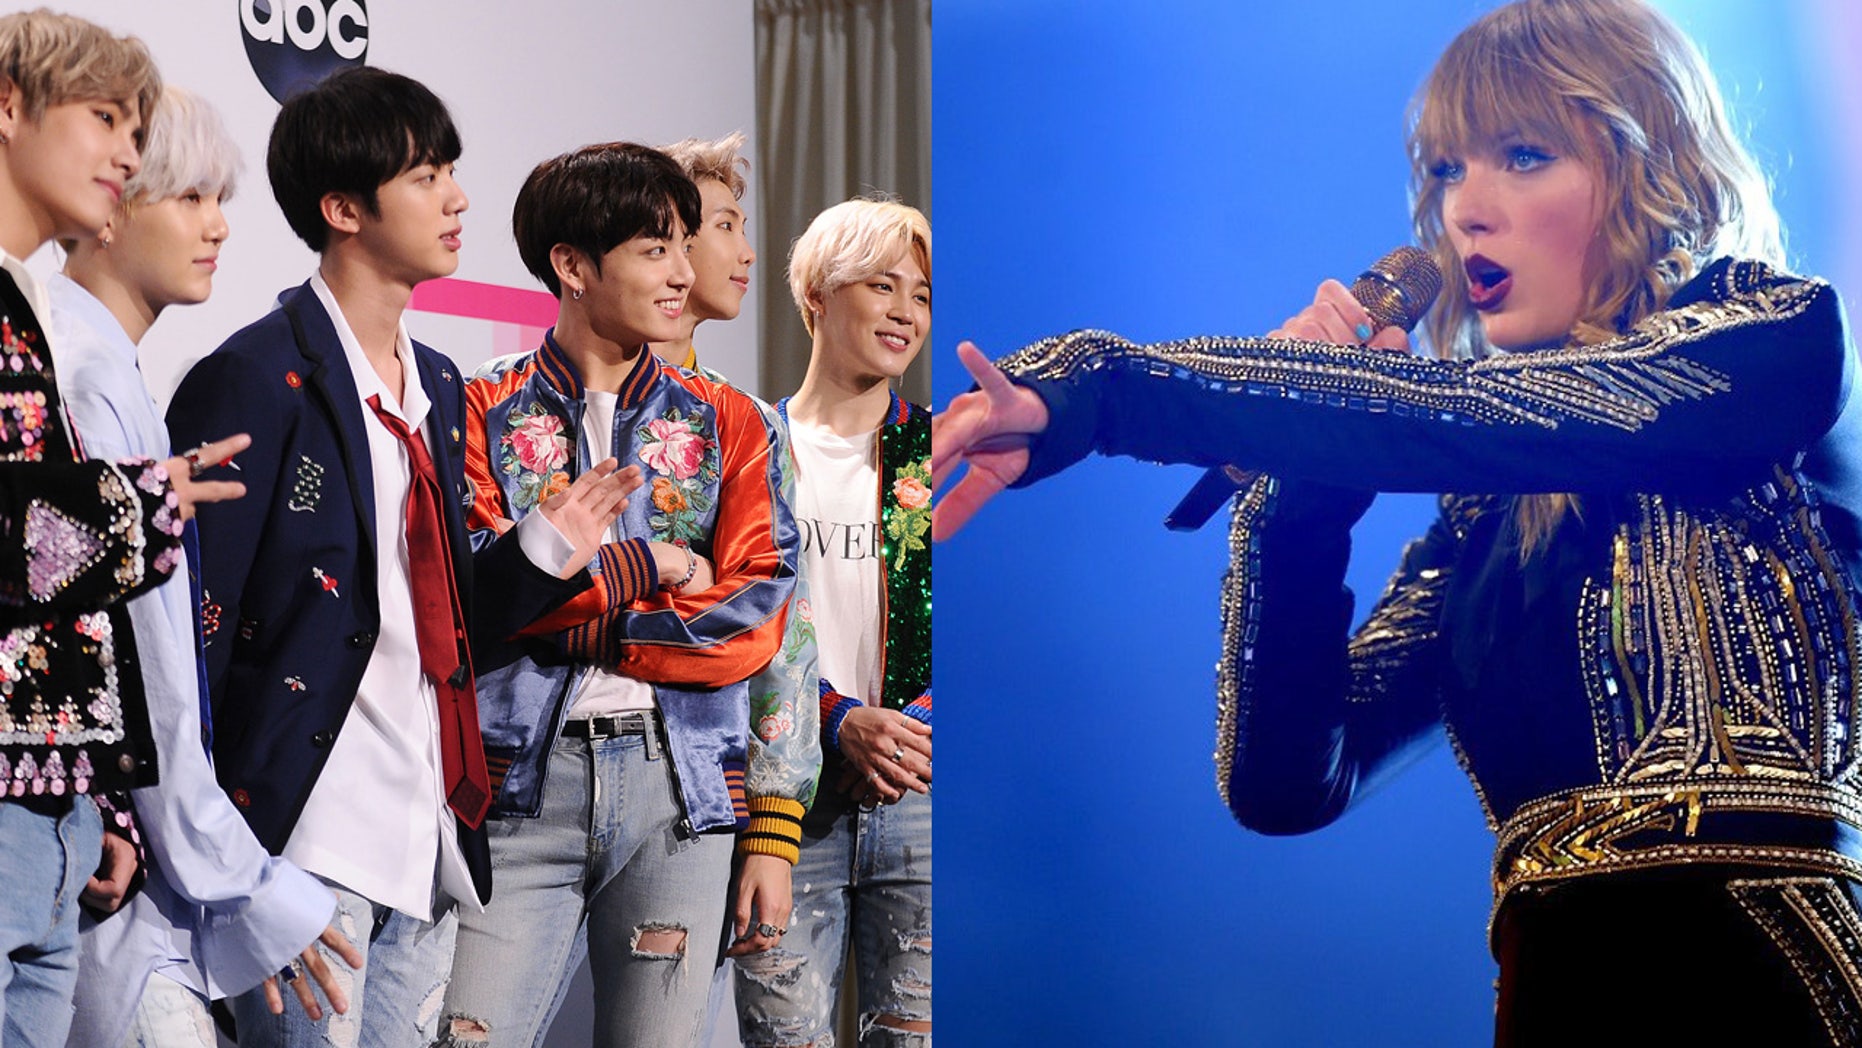 K Pop Band Bts Beats Taylor Swifts Youtube Record For Most